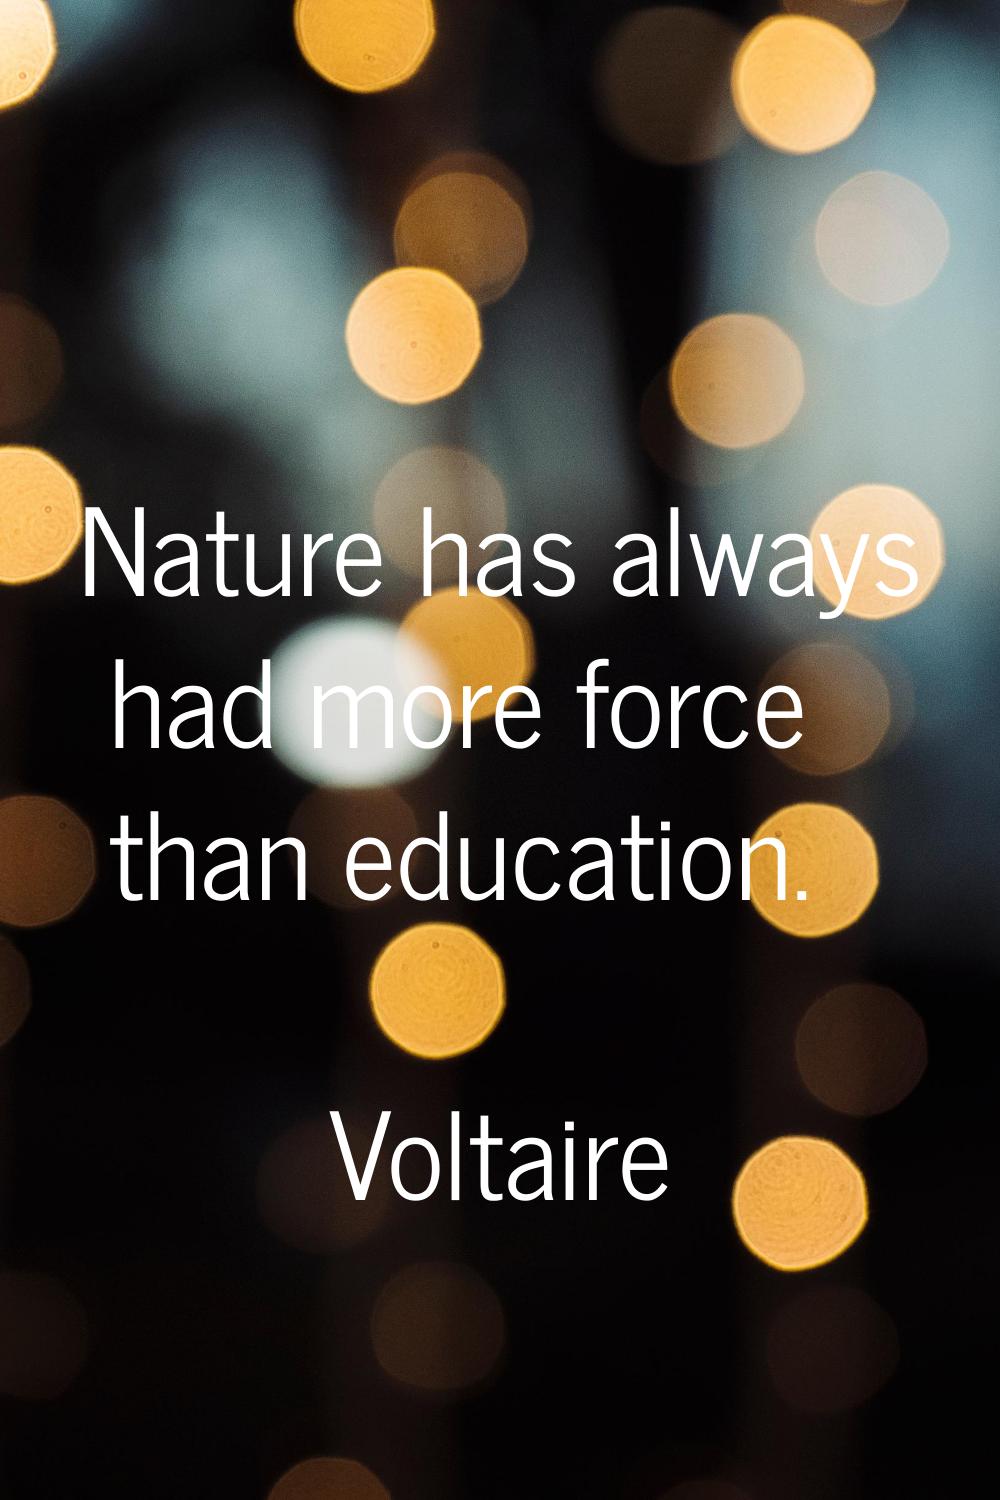 Nature has always had more force than education.